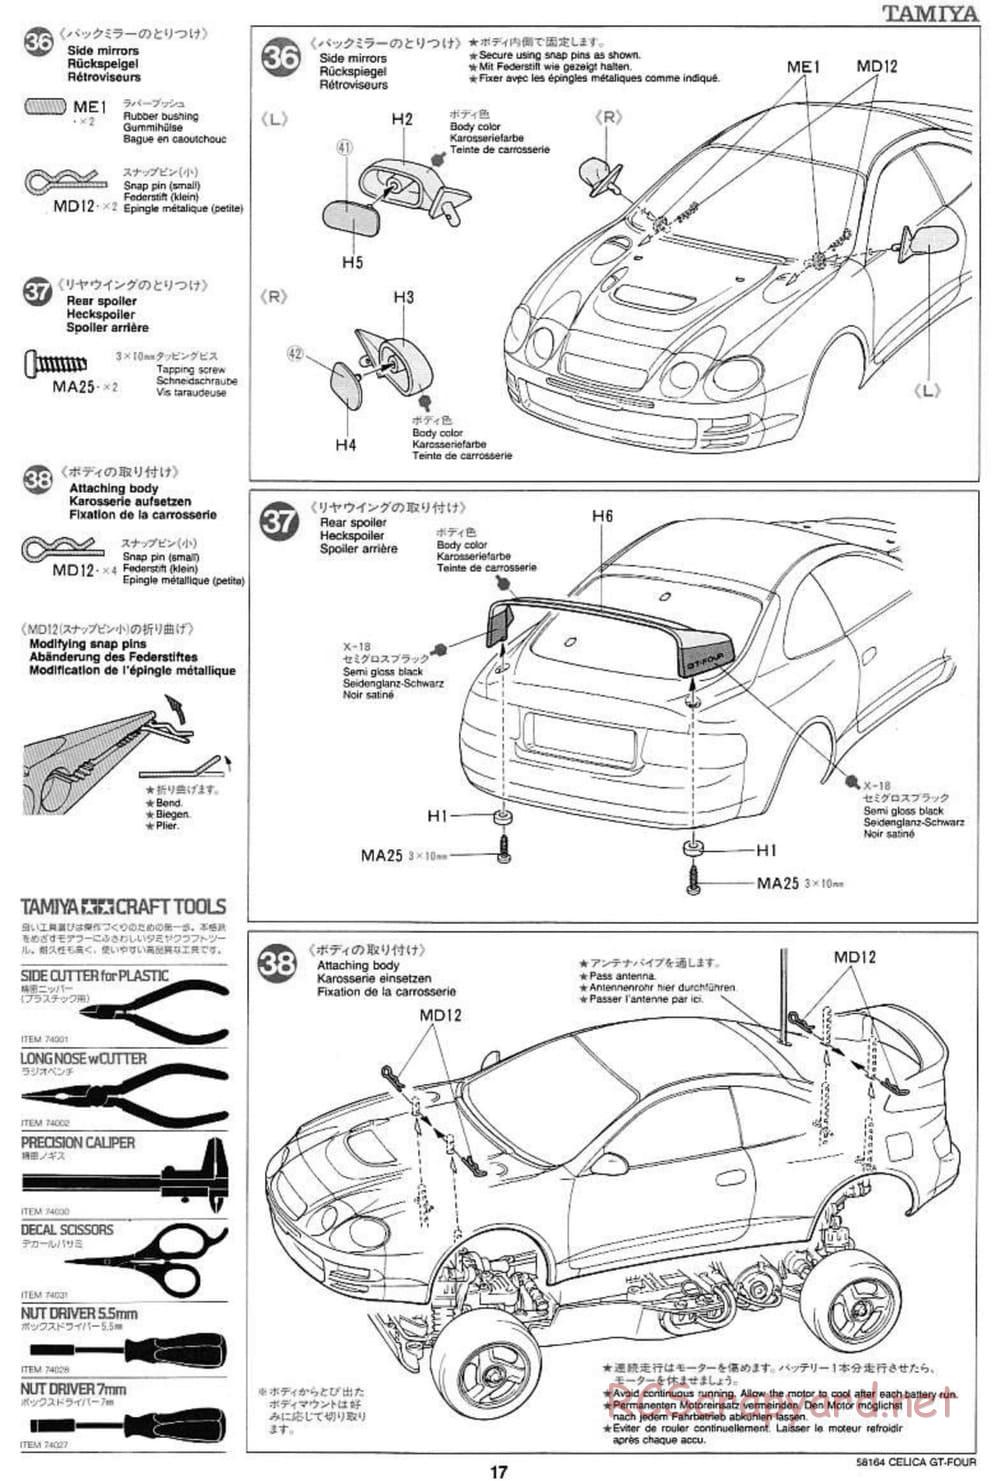 Tamiya - Toyota Celica GT Four - TA-02 Chassis - Manual - Page 18